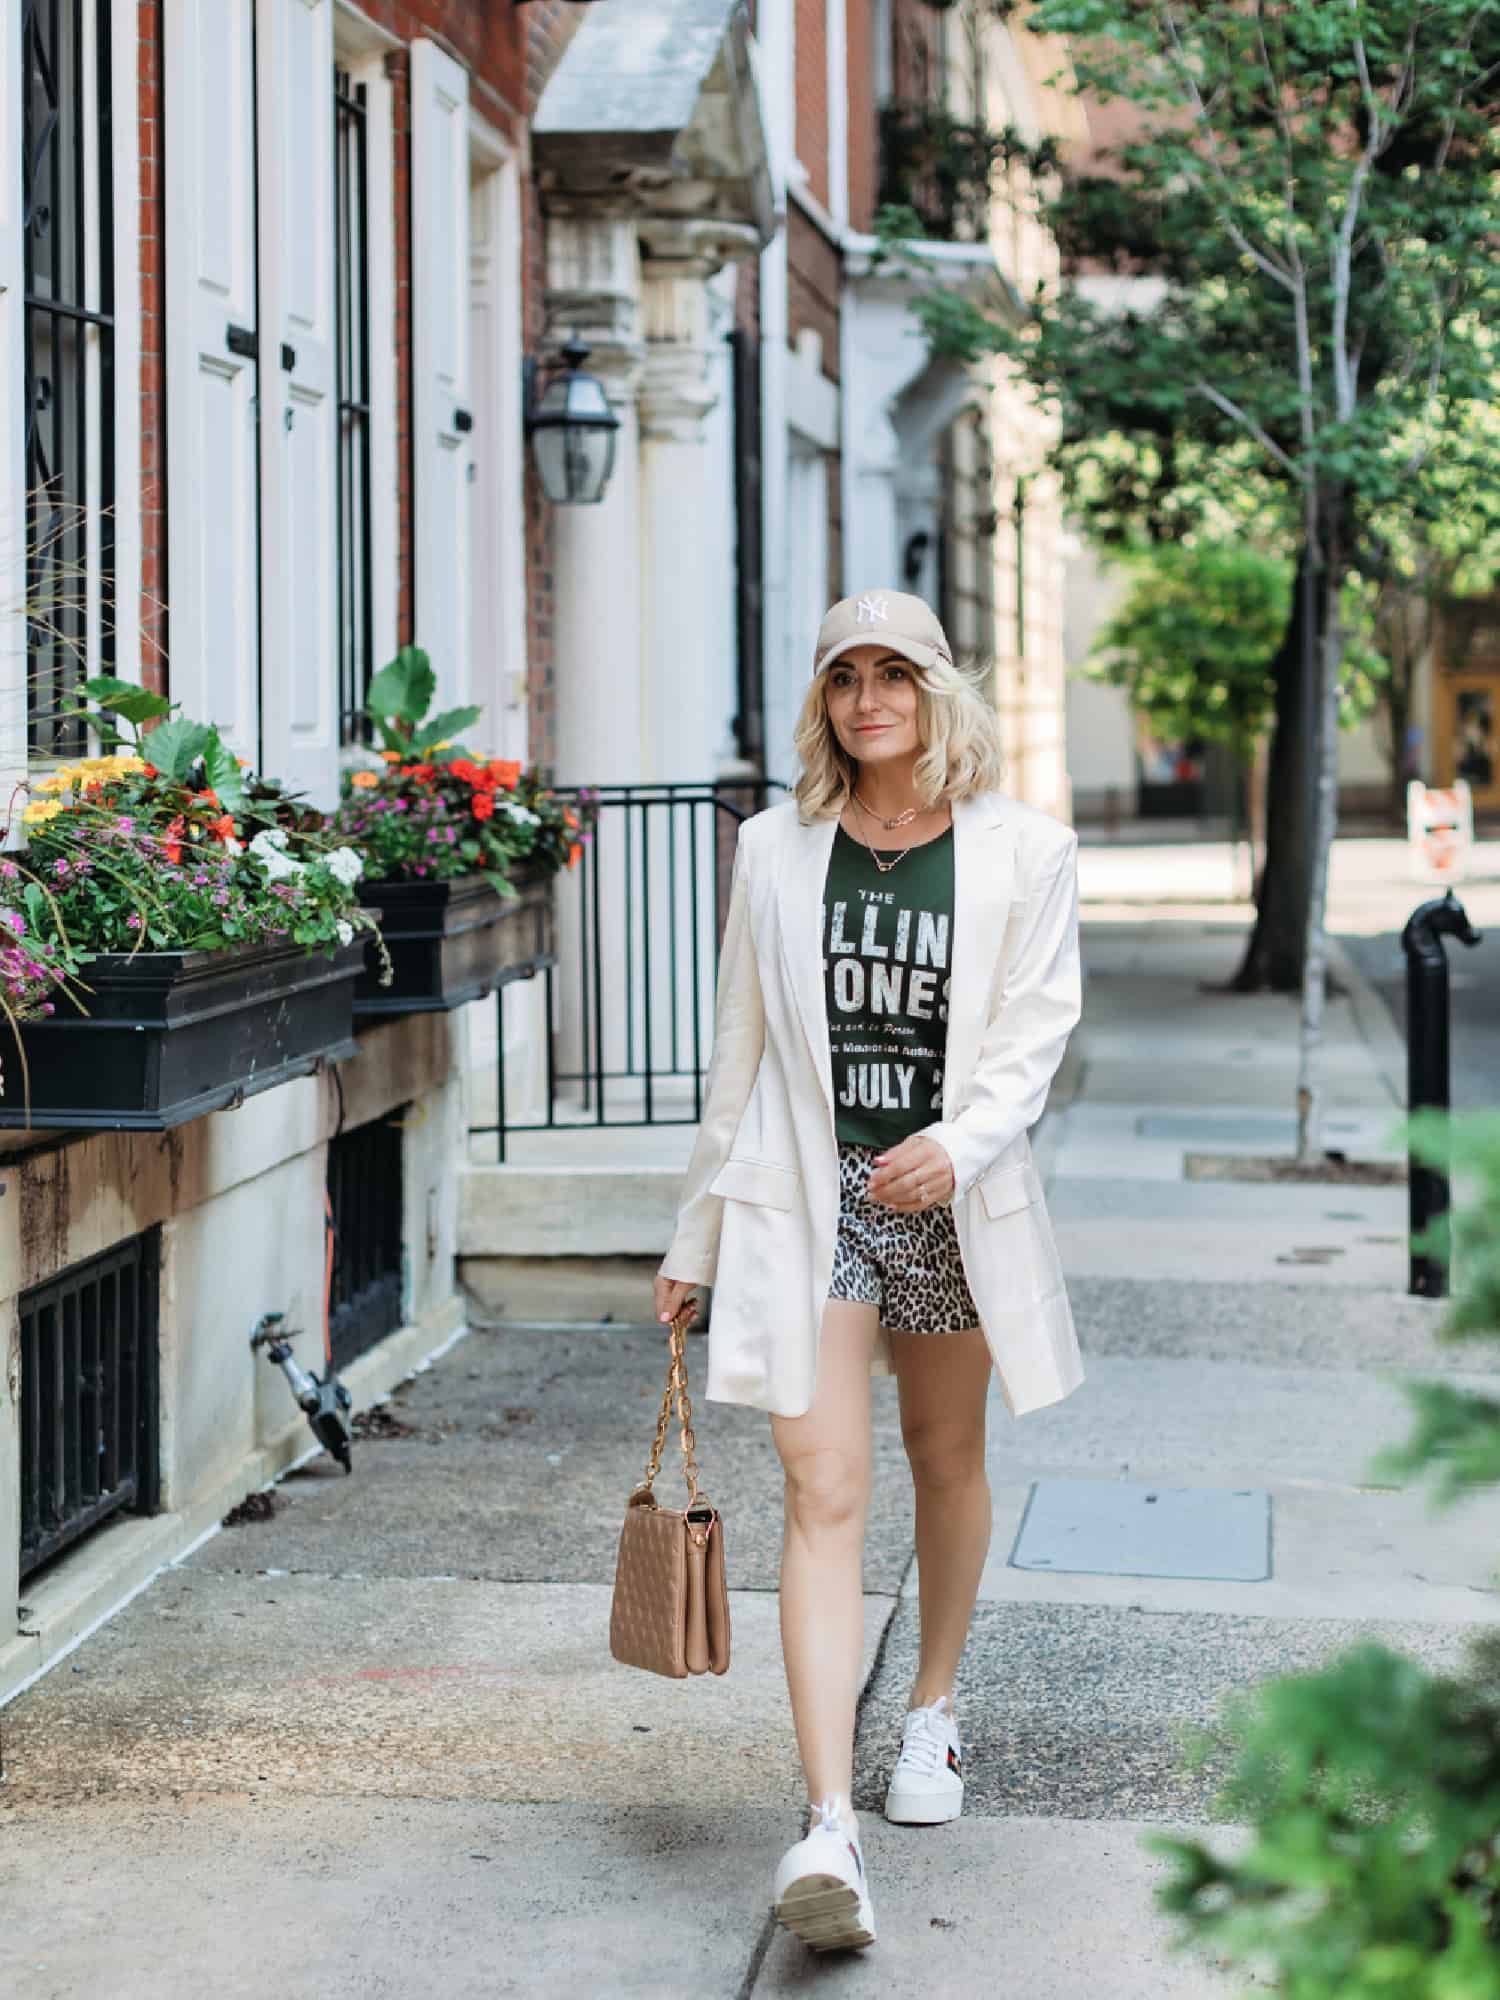 A woman looking summer chic, while she walks the city streets. She is wearing animal print shorts, a green graphic tee, and an oversized cream blazer. She is also wearing a cream-colored ball cap, and Gucci sneakers, while carrying a brown Gucci purse.